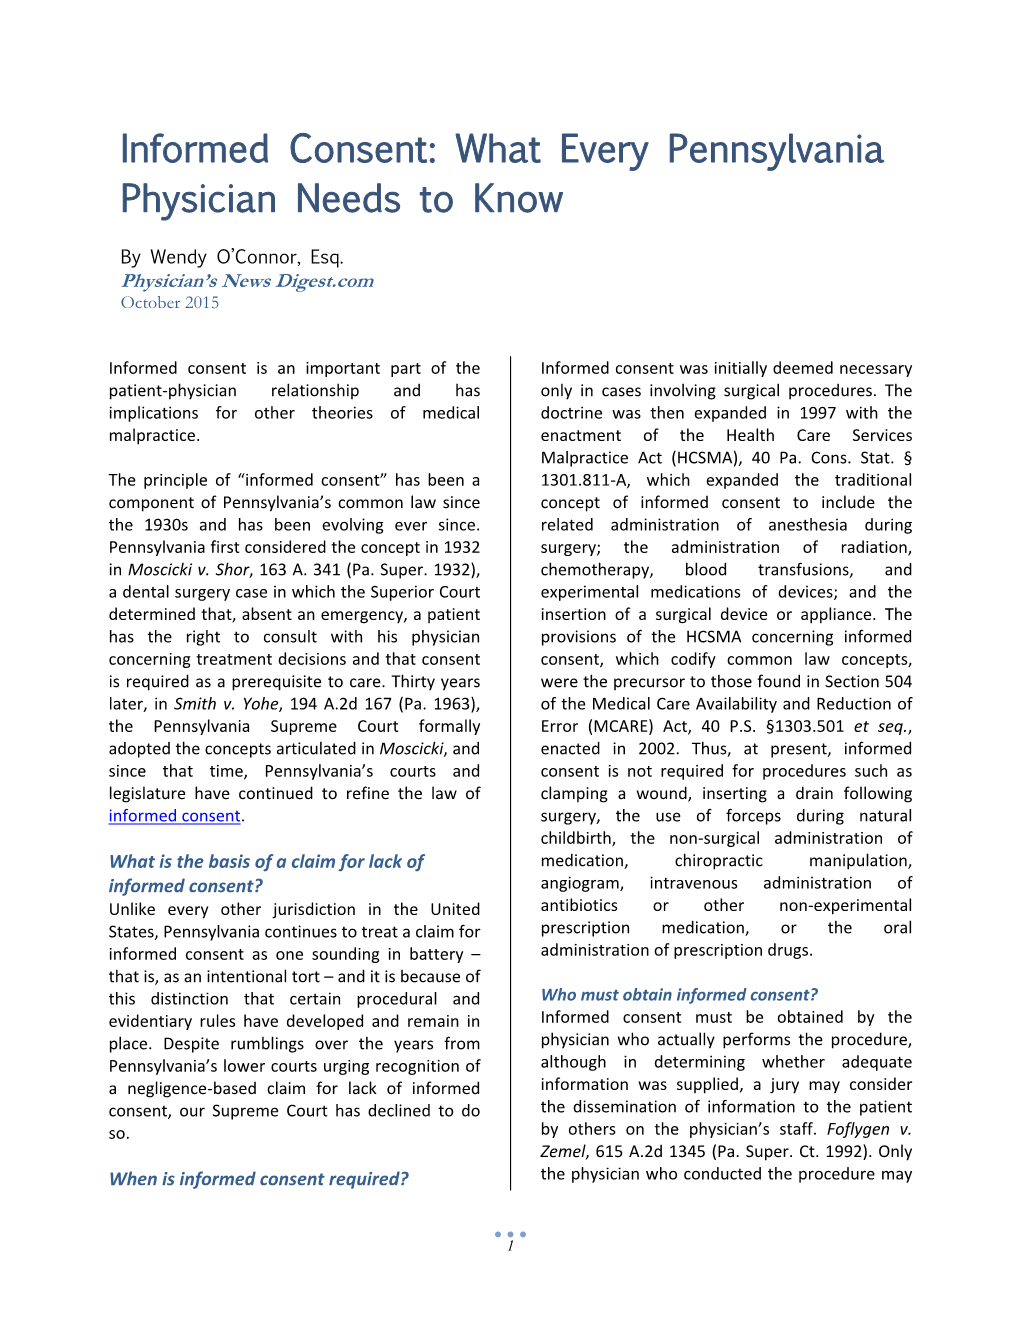 Informed Consent: What Every Pennsylvania Physician Needs to Know